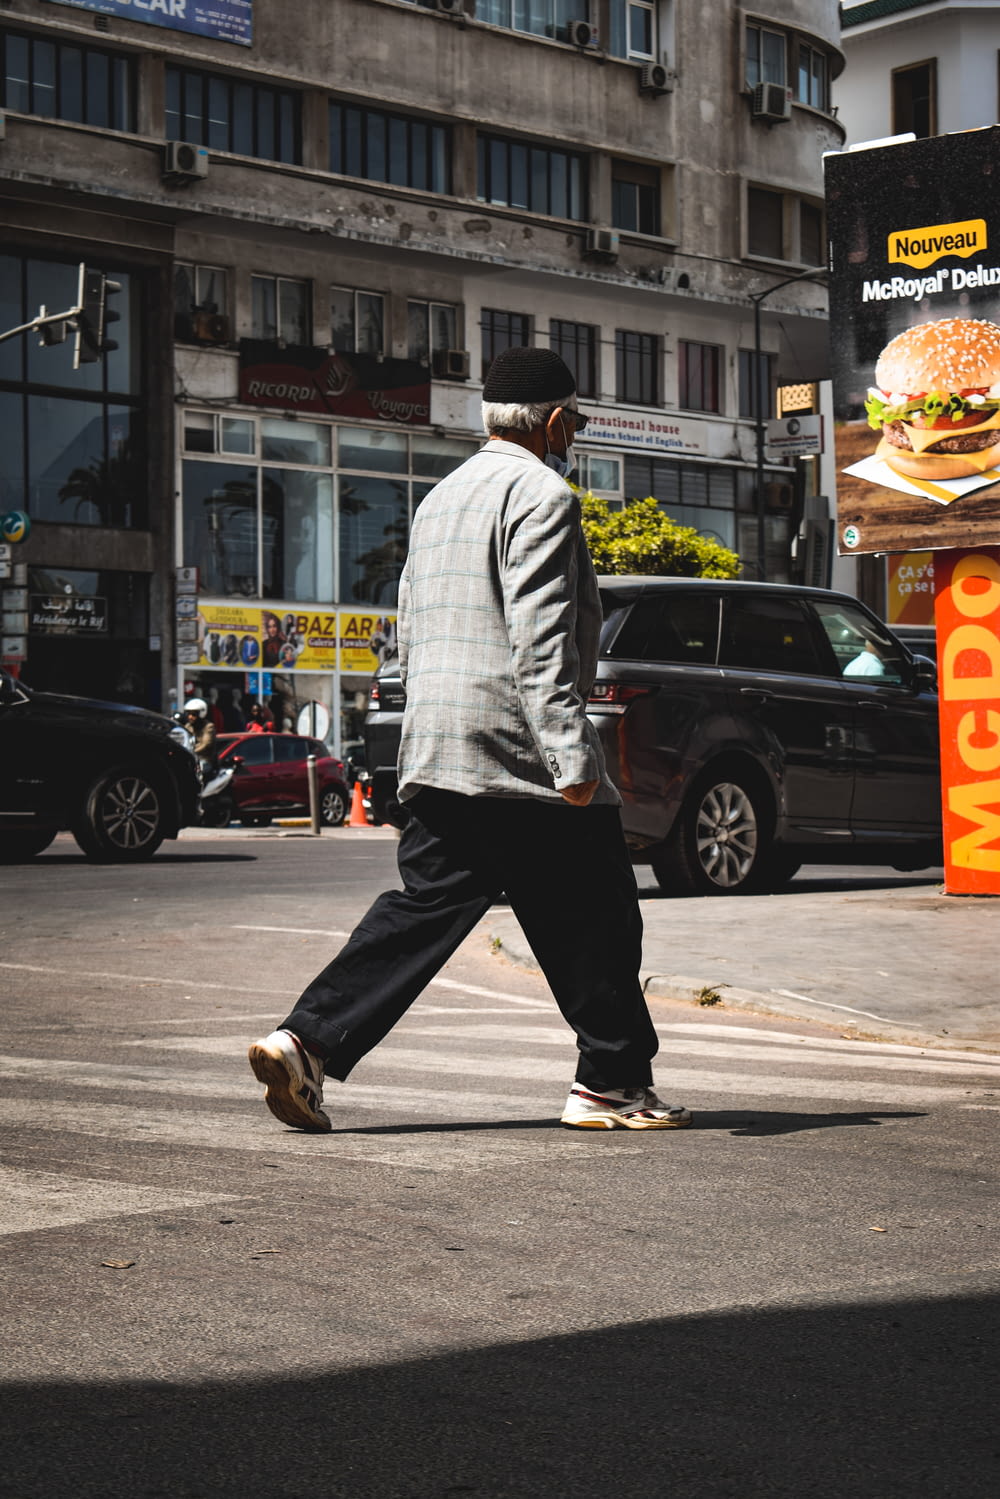 a man walking across a street in front of a burger